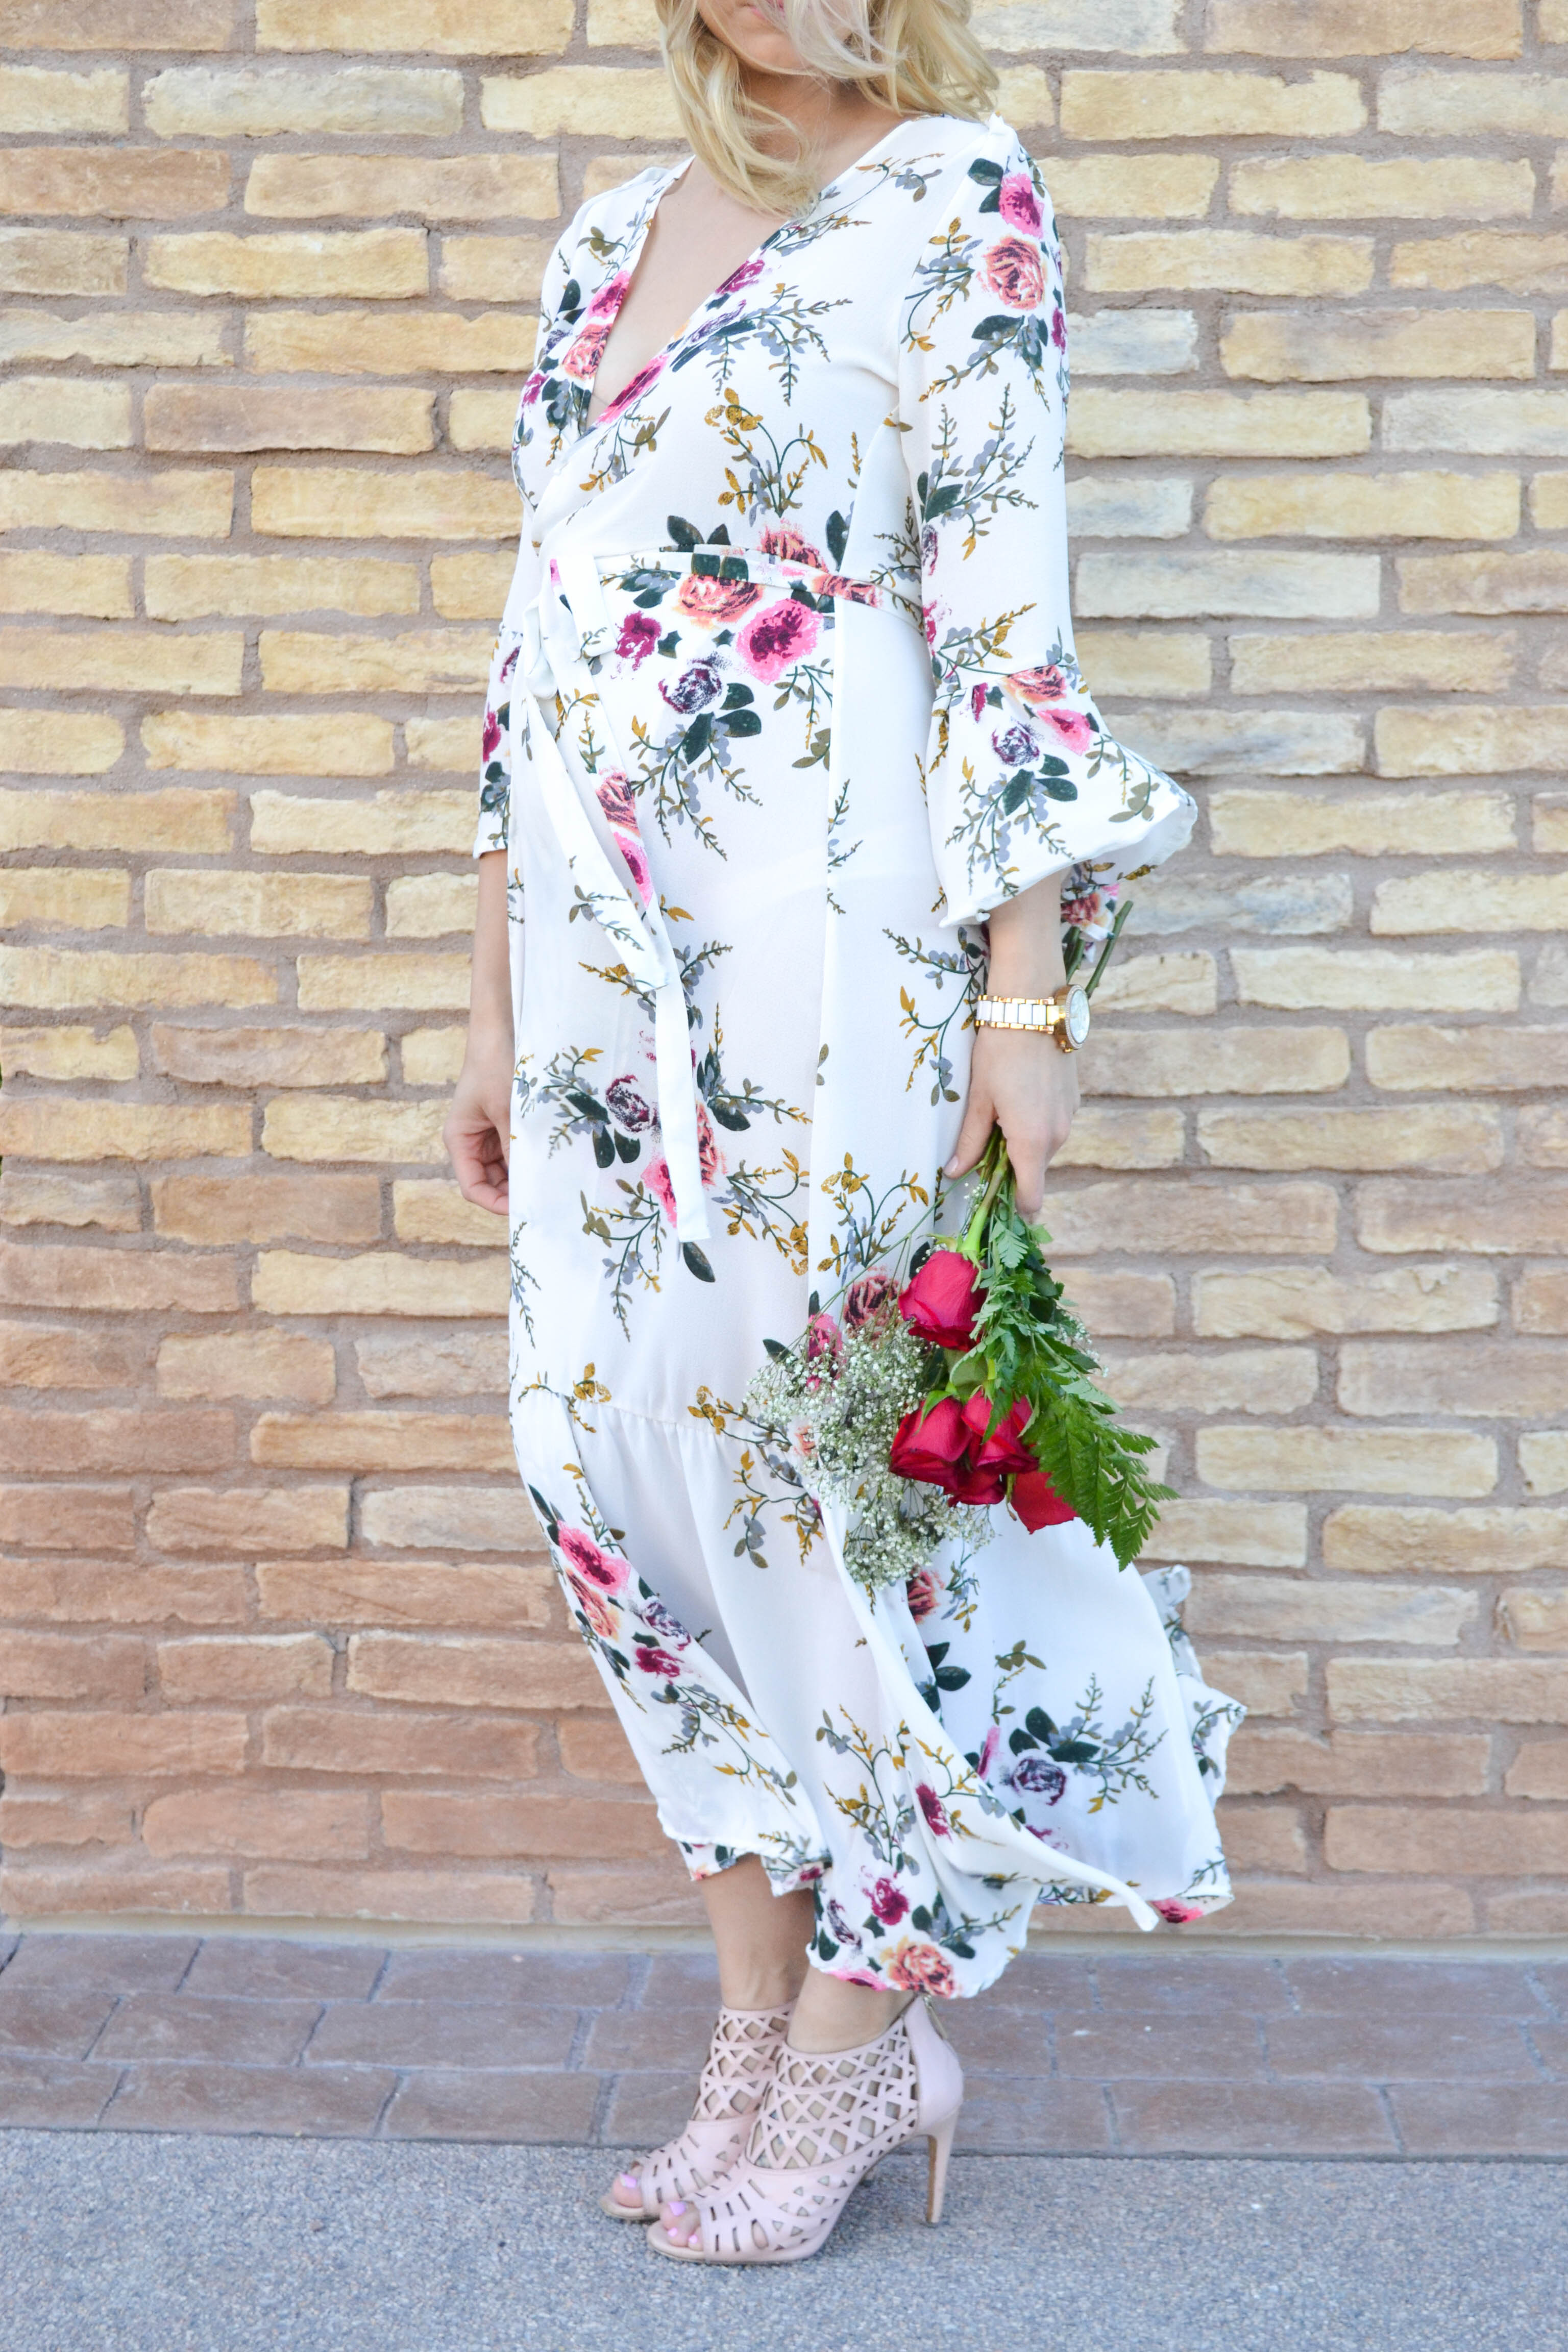 Floral Wrap Dress that is Perfect for Spring